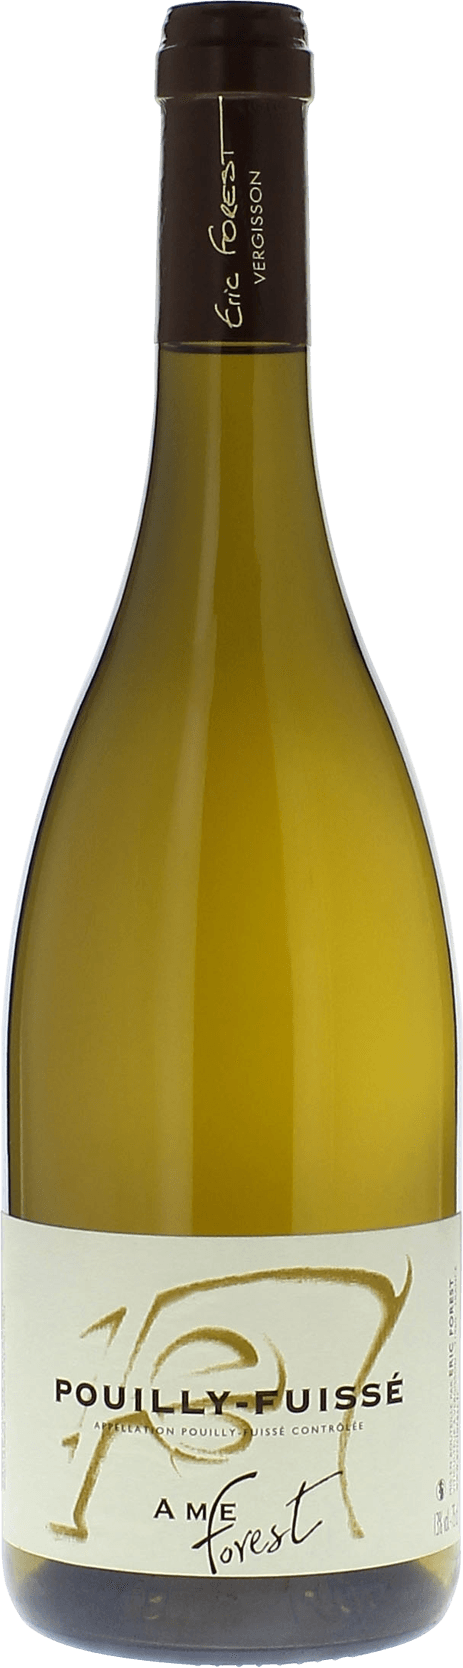 Pouilly fuiss ame 2016 Domaine Eric Forest, Bourgogne blanc